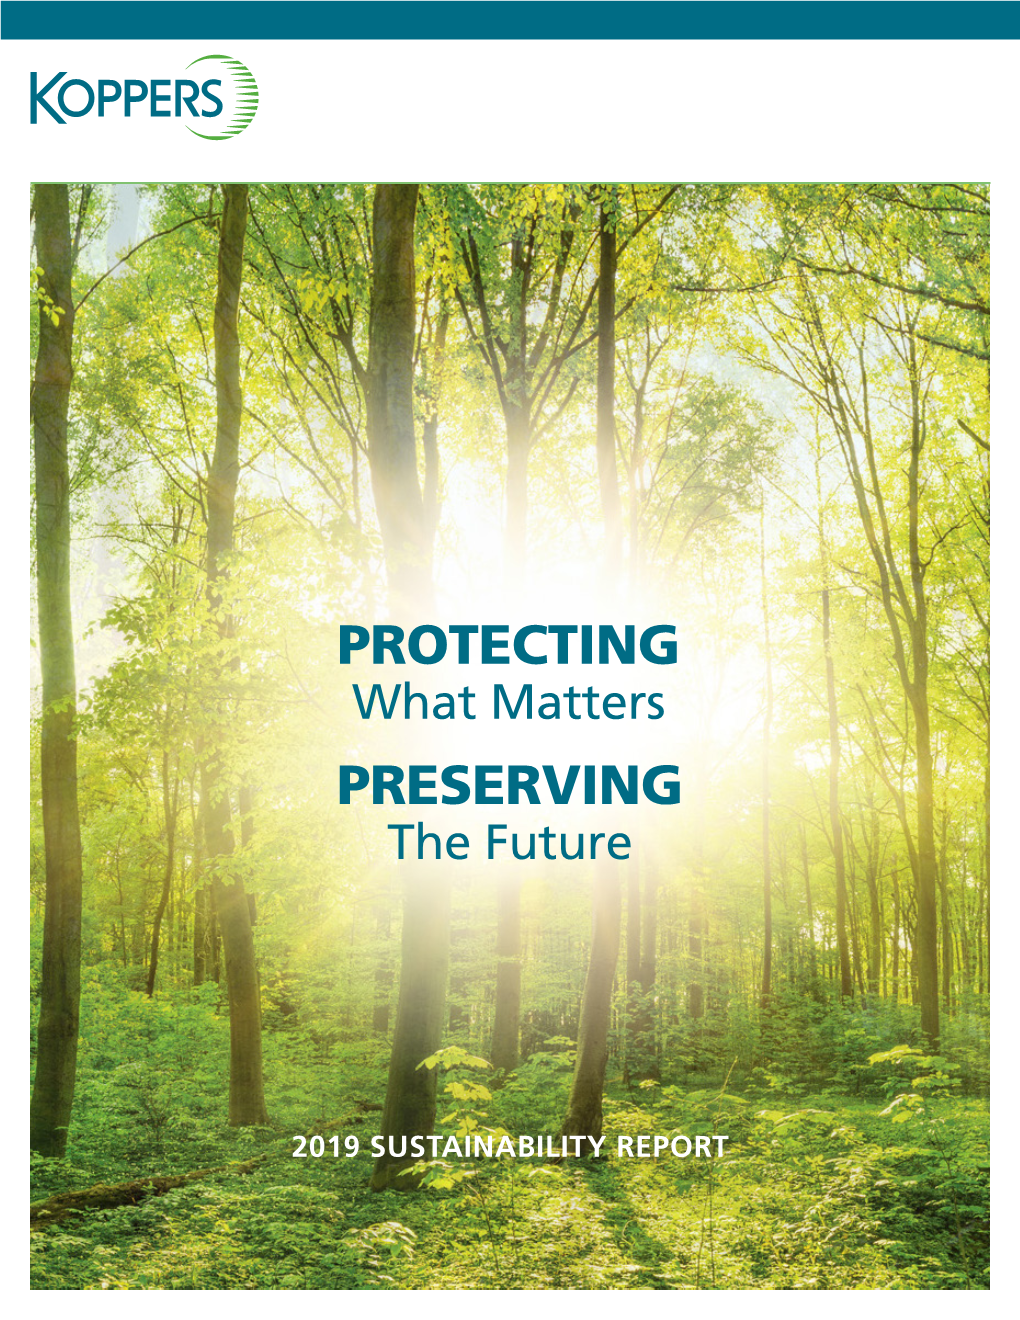 Protecting What Matters. Preserving the Future